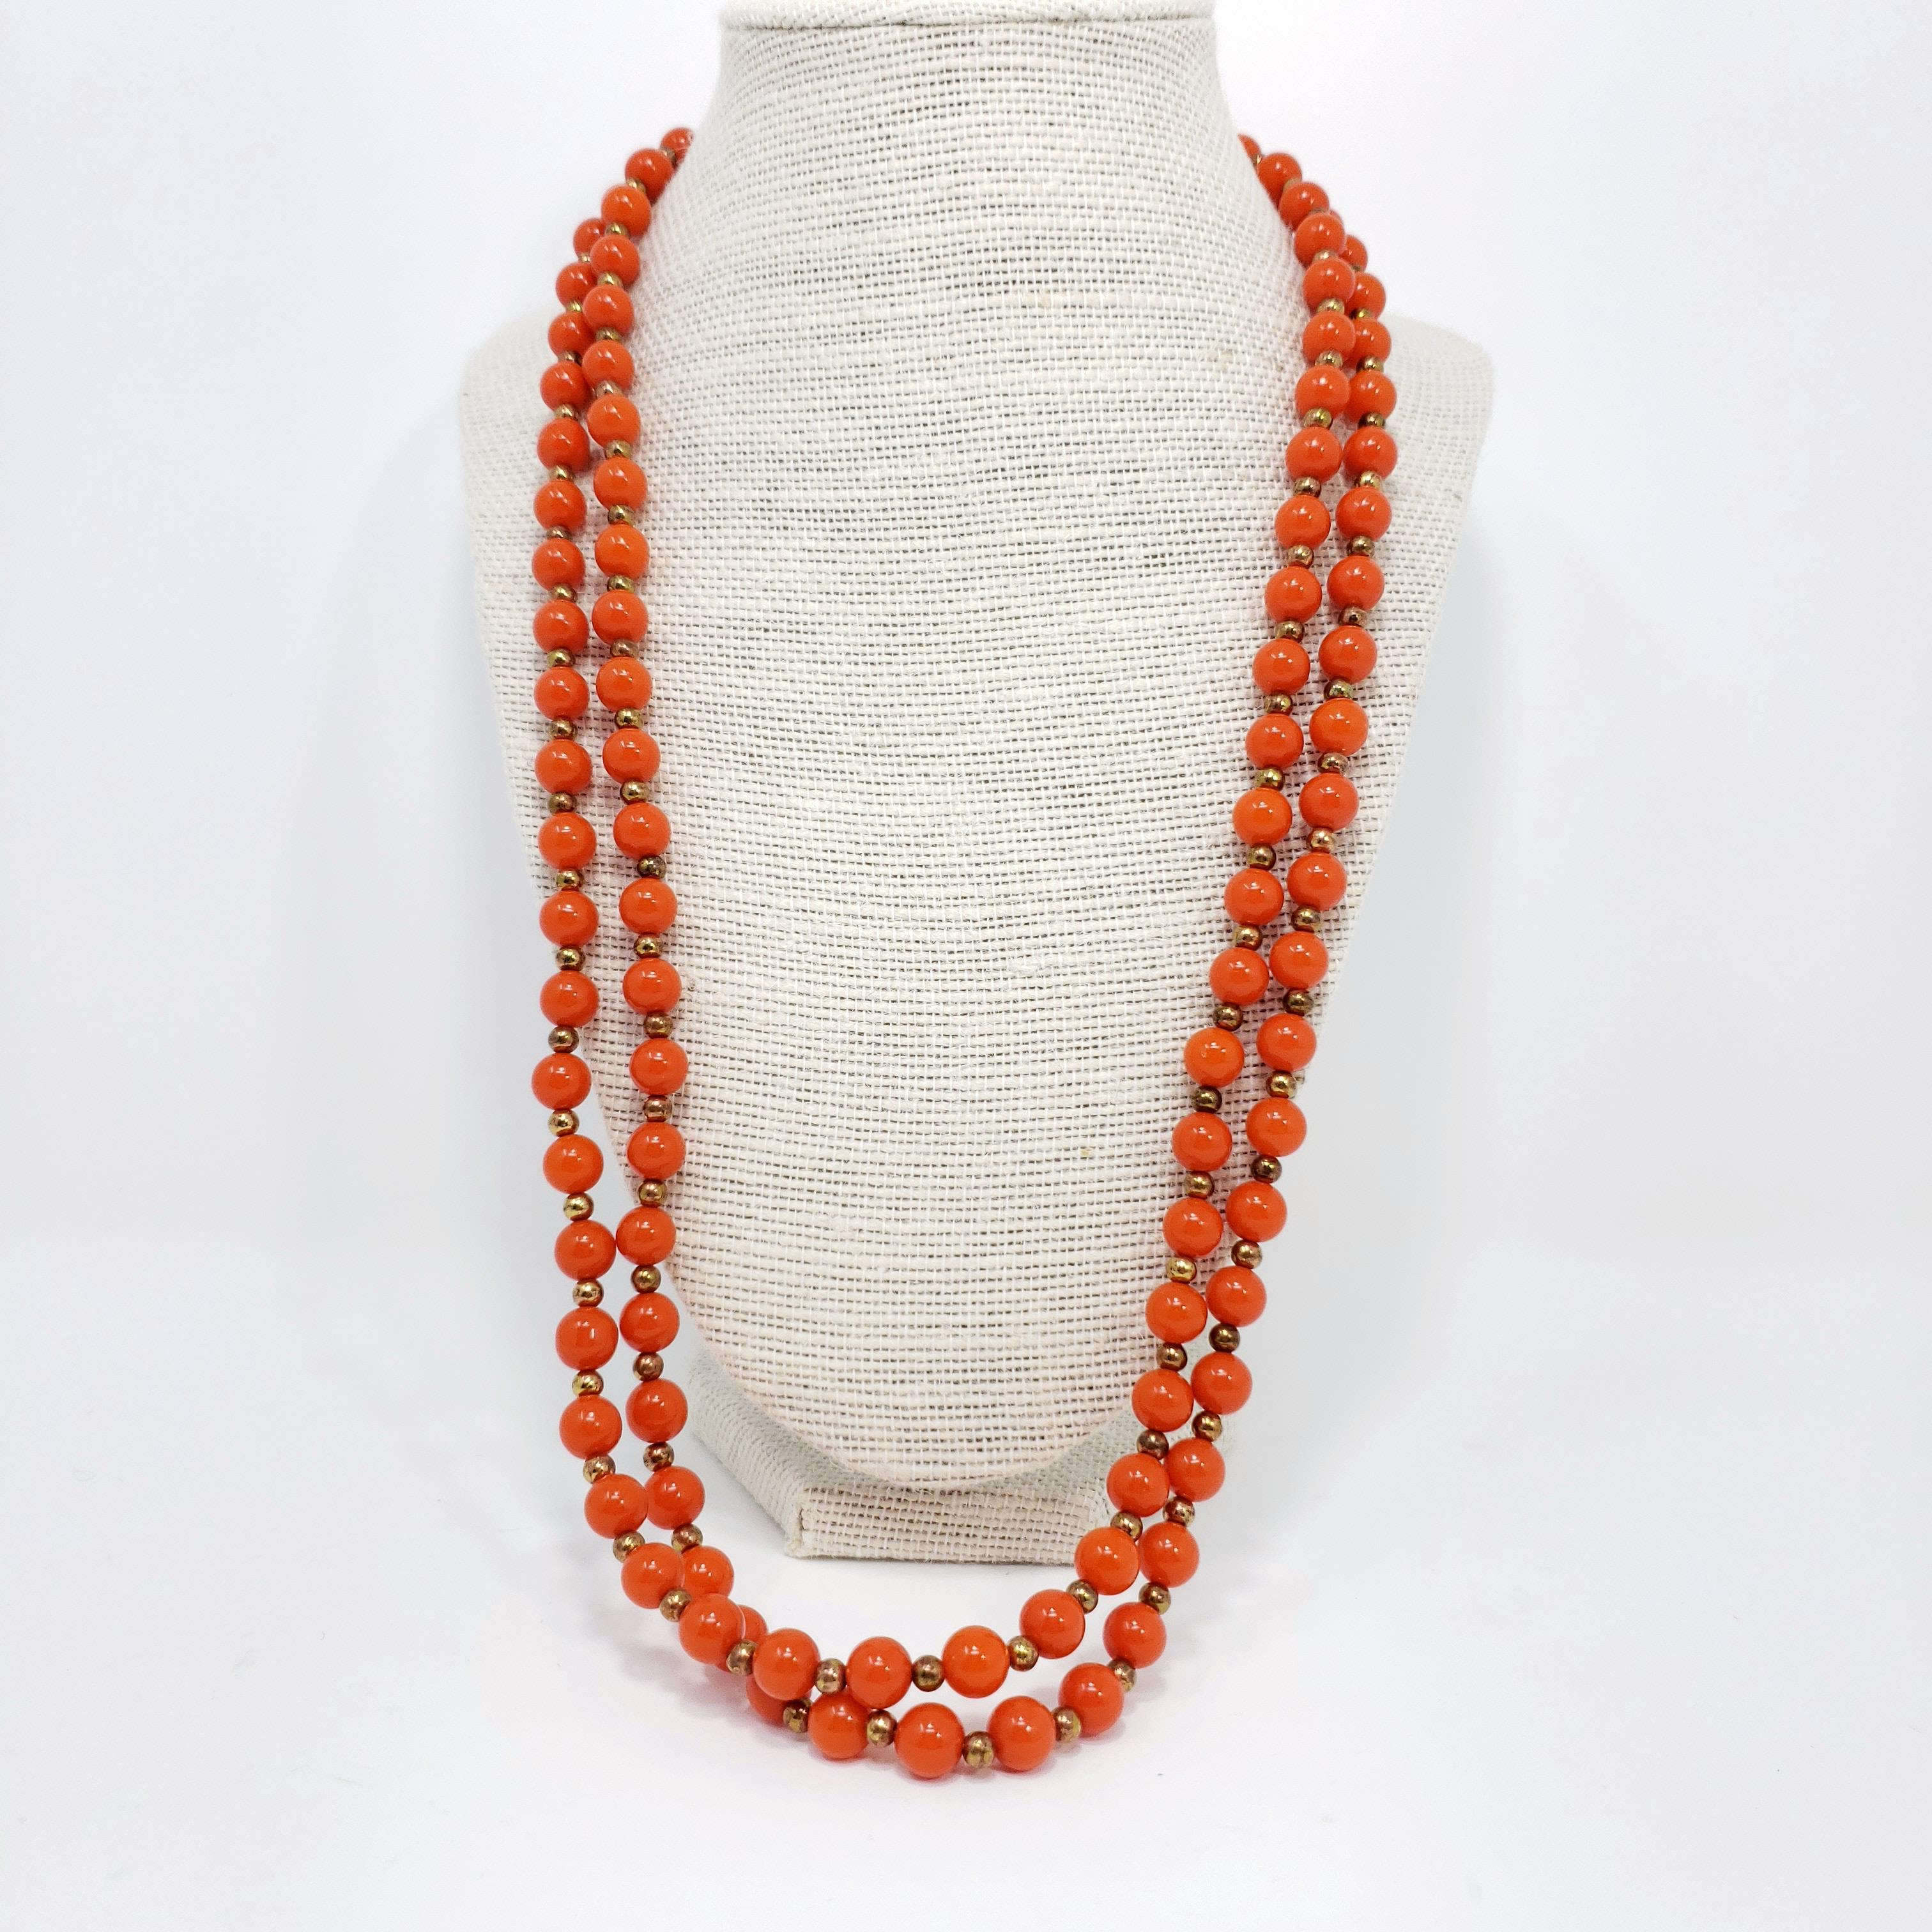 Matching vintage faux salmon coral bead necklace and earrings, accented with glowing gold-tone beads and motifs.

Circa mid 1900s.

Necklace: 52 inches around
Earrings: 1.25 inches x 0.8 inches